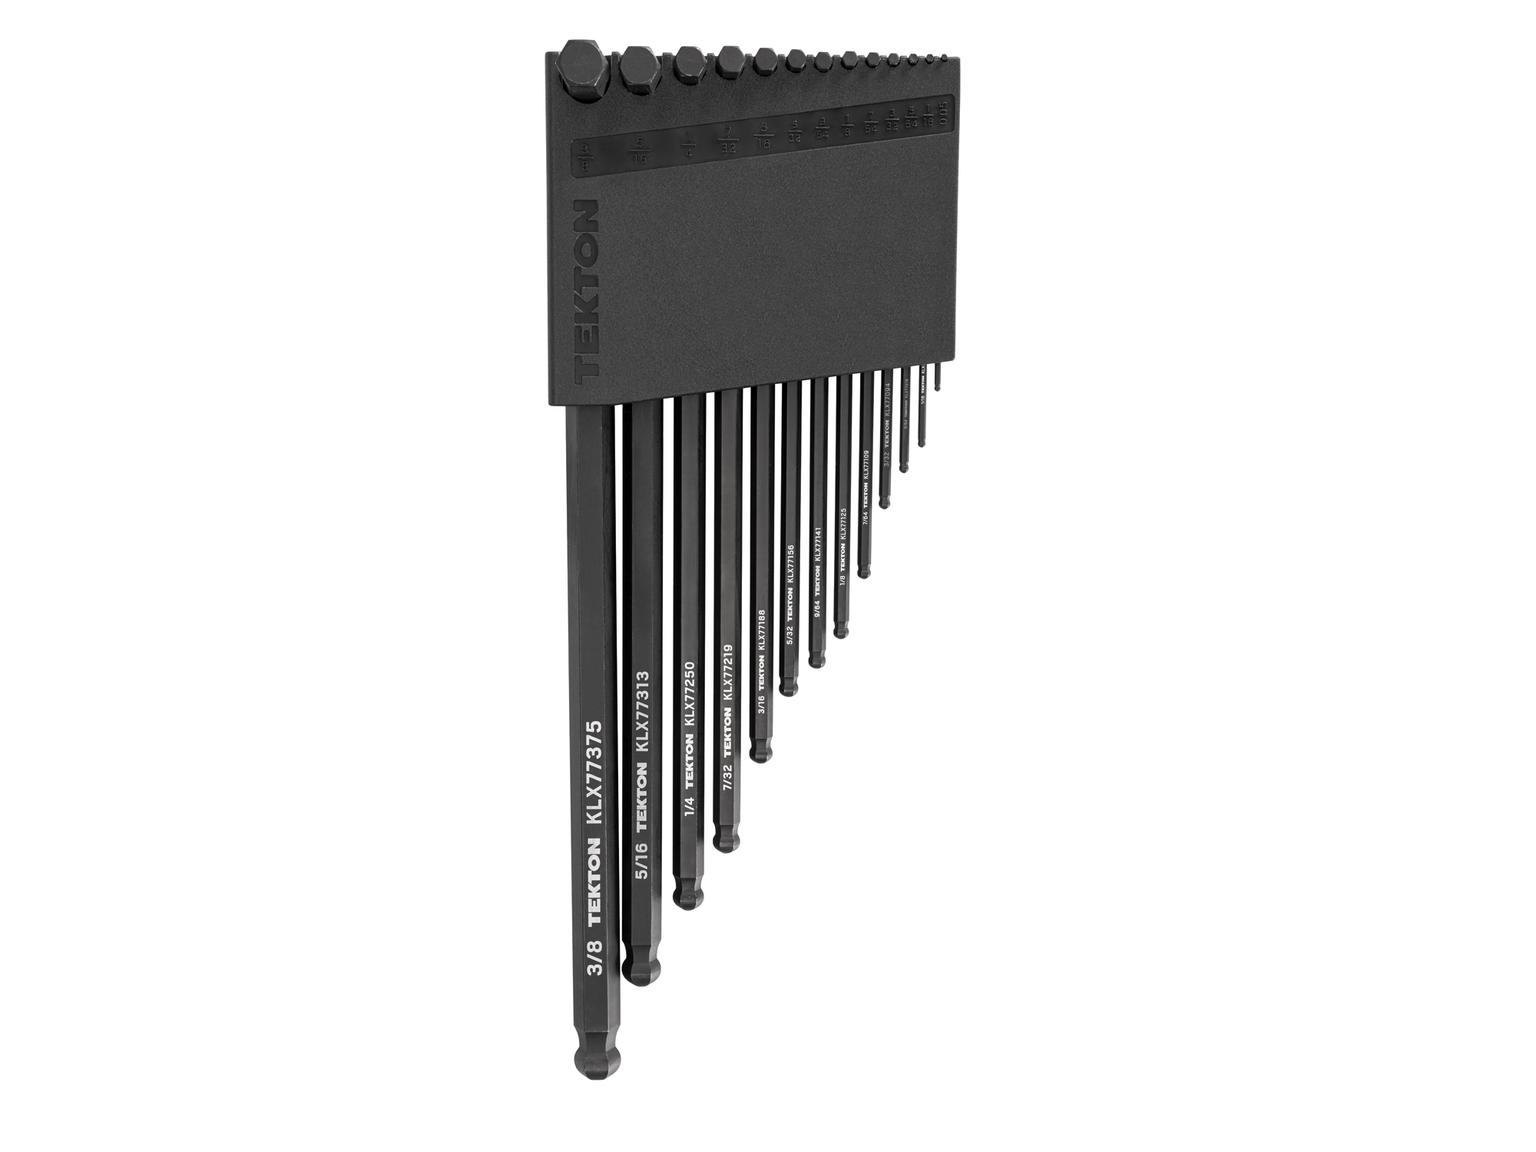 TEKTON KLX91112-D Short Arm Ball End Hex L-Key Set with Holder, 13-Piece (0.050-3/8 in.)